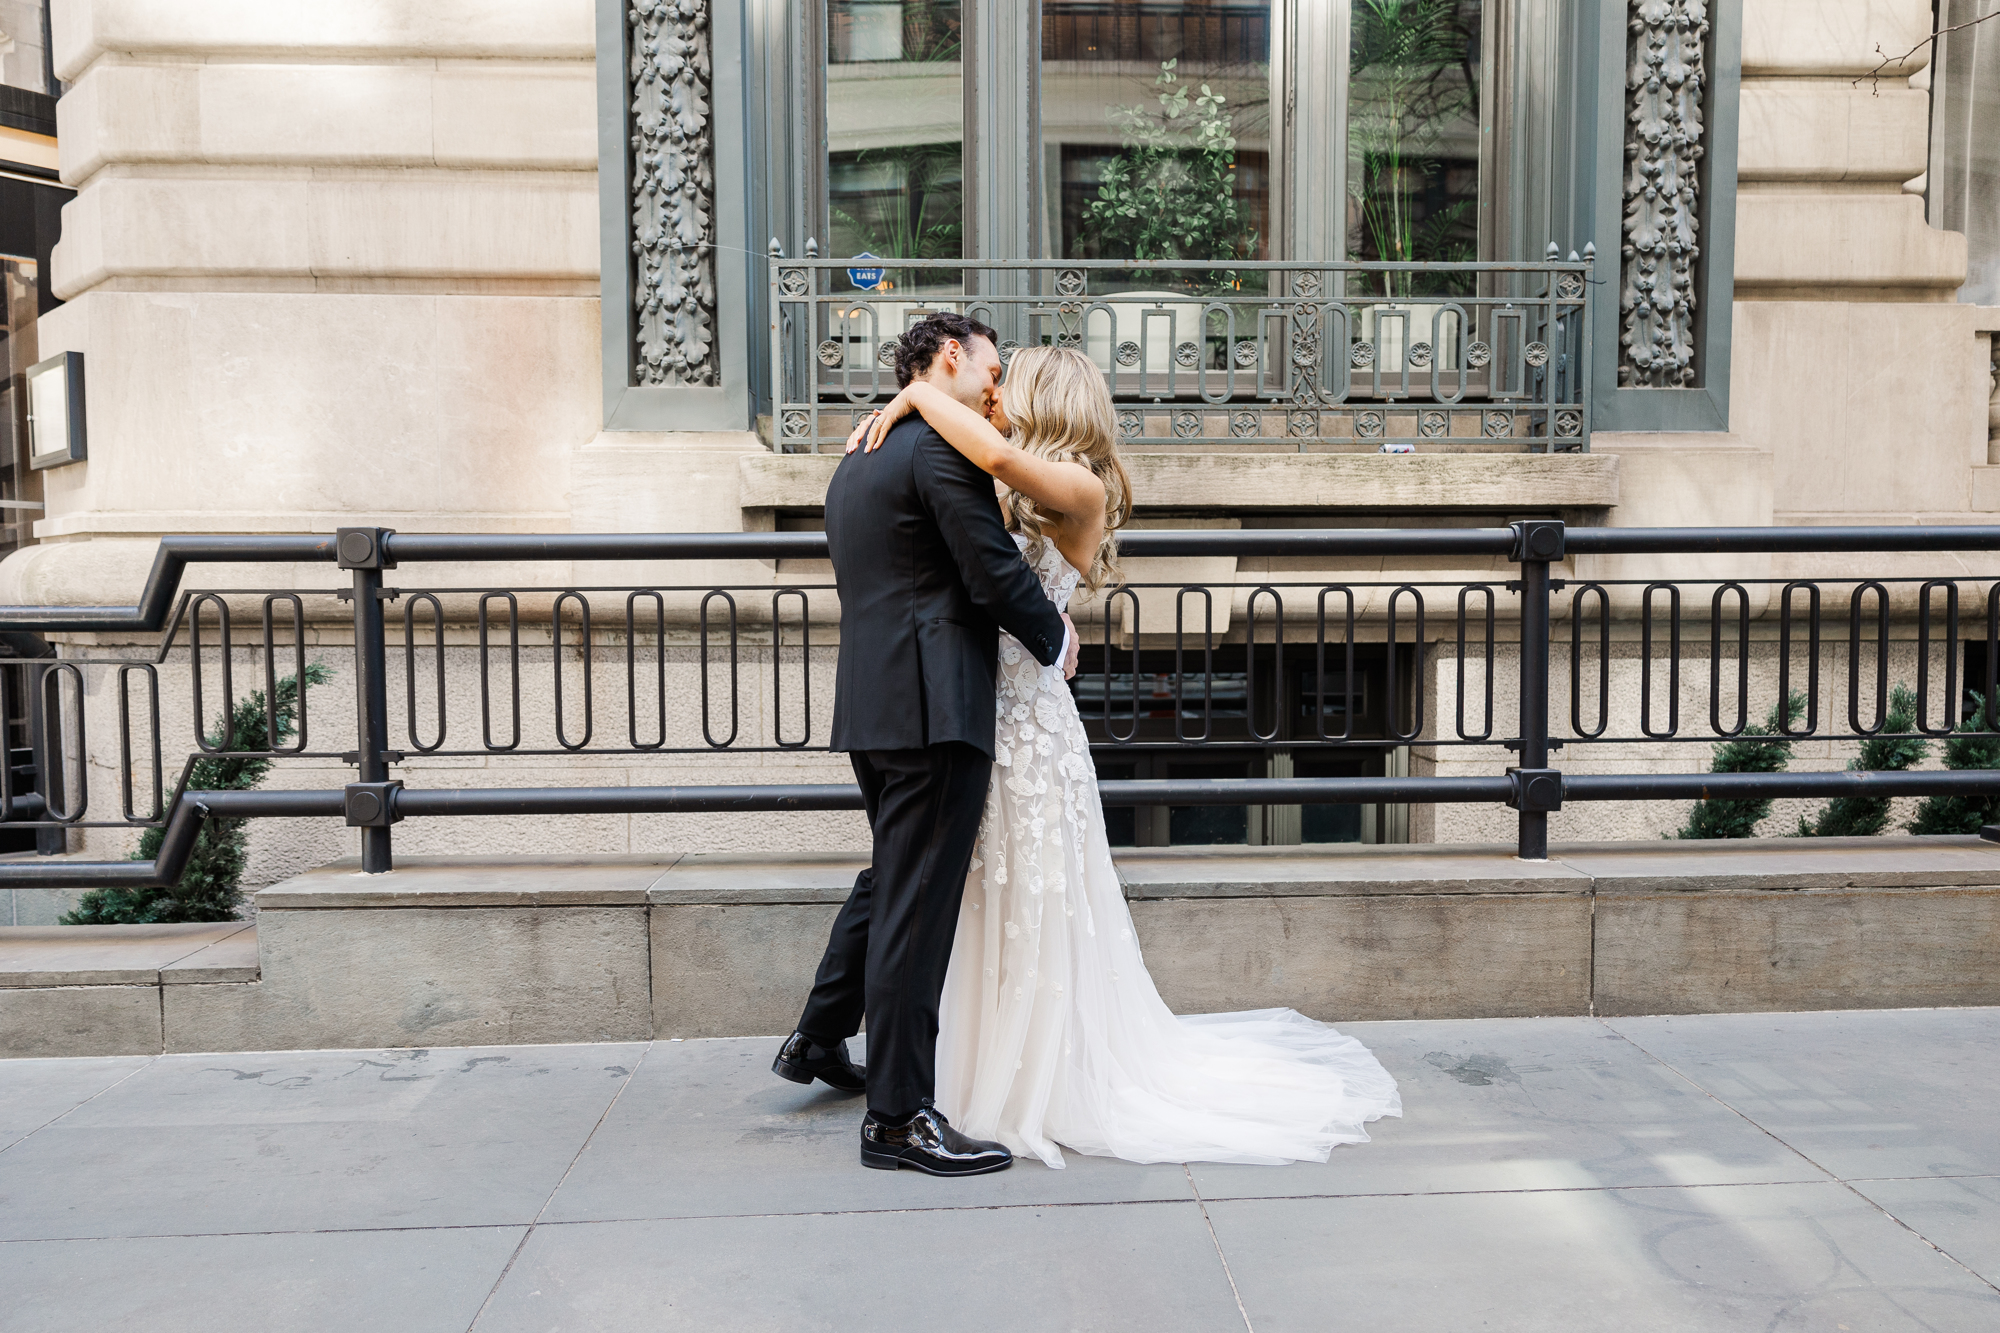 Candid and Fun Battello Wedding in Jersey City